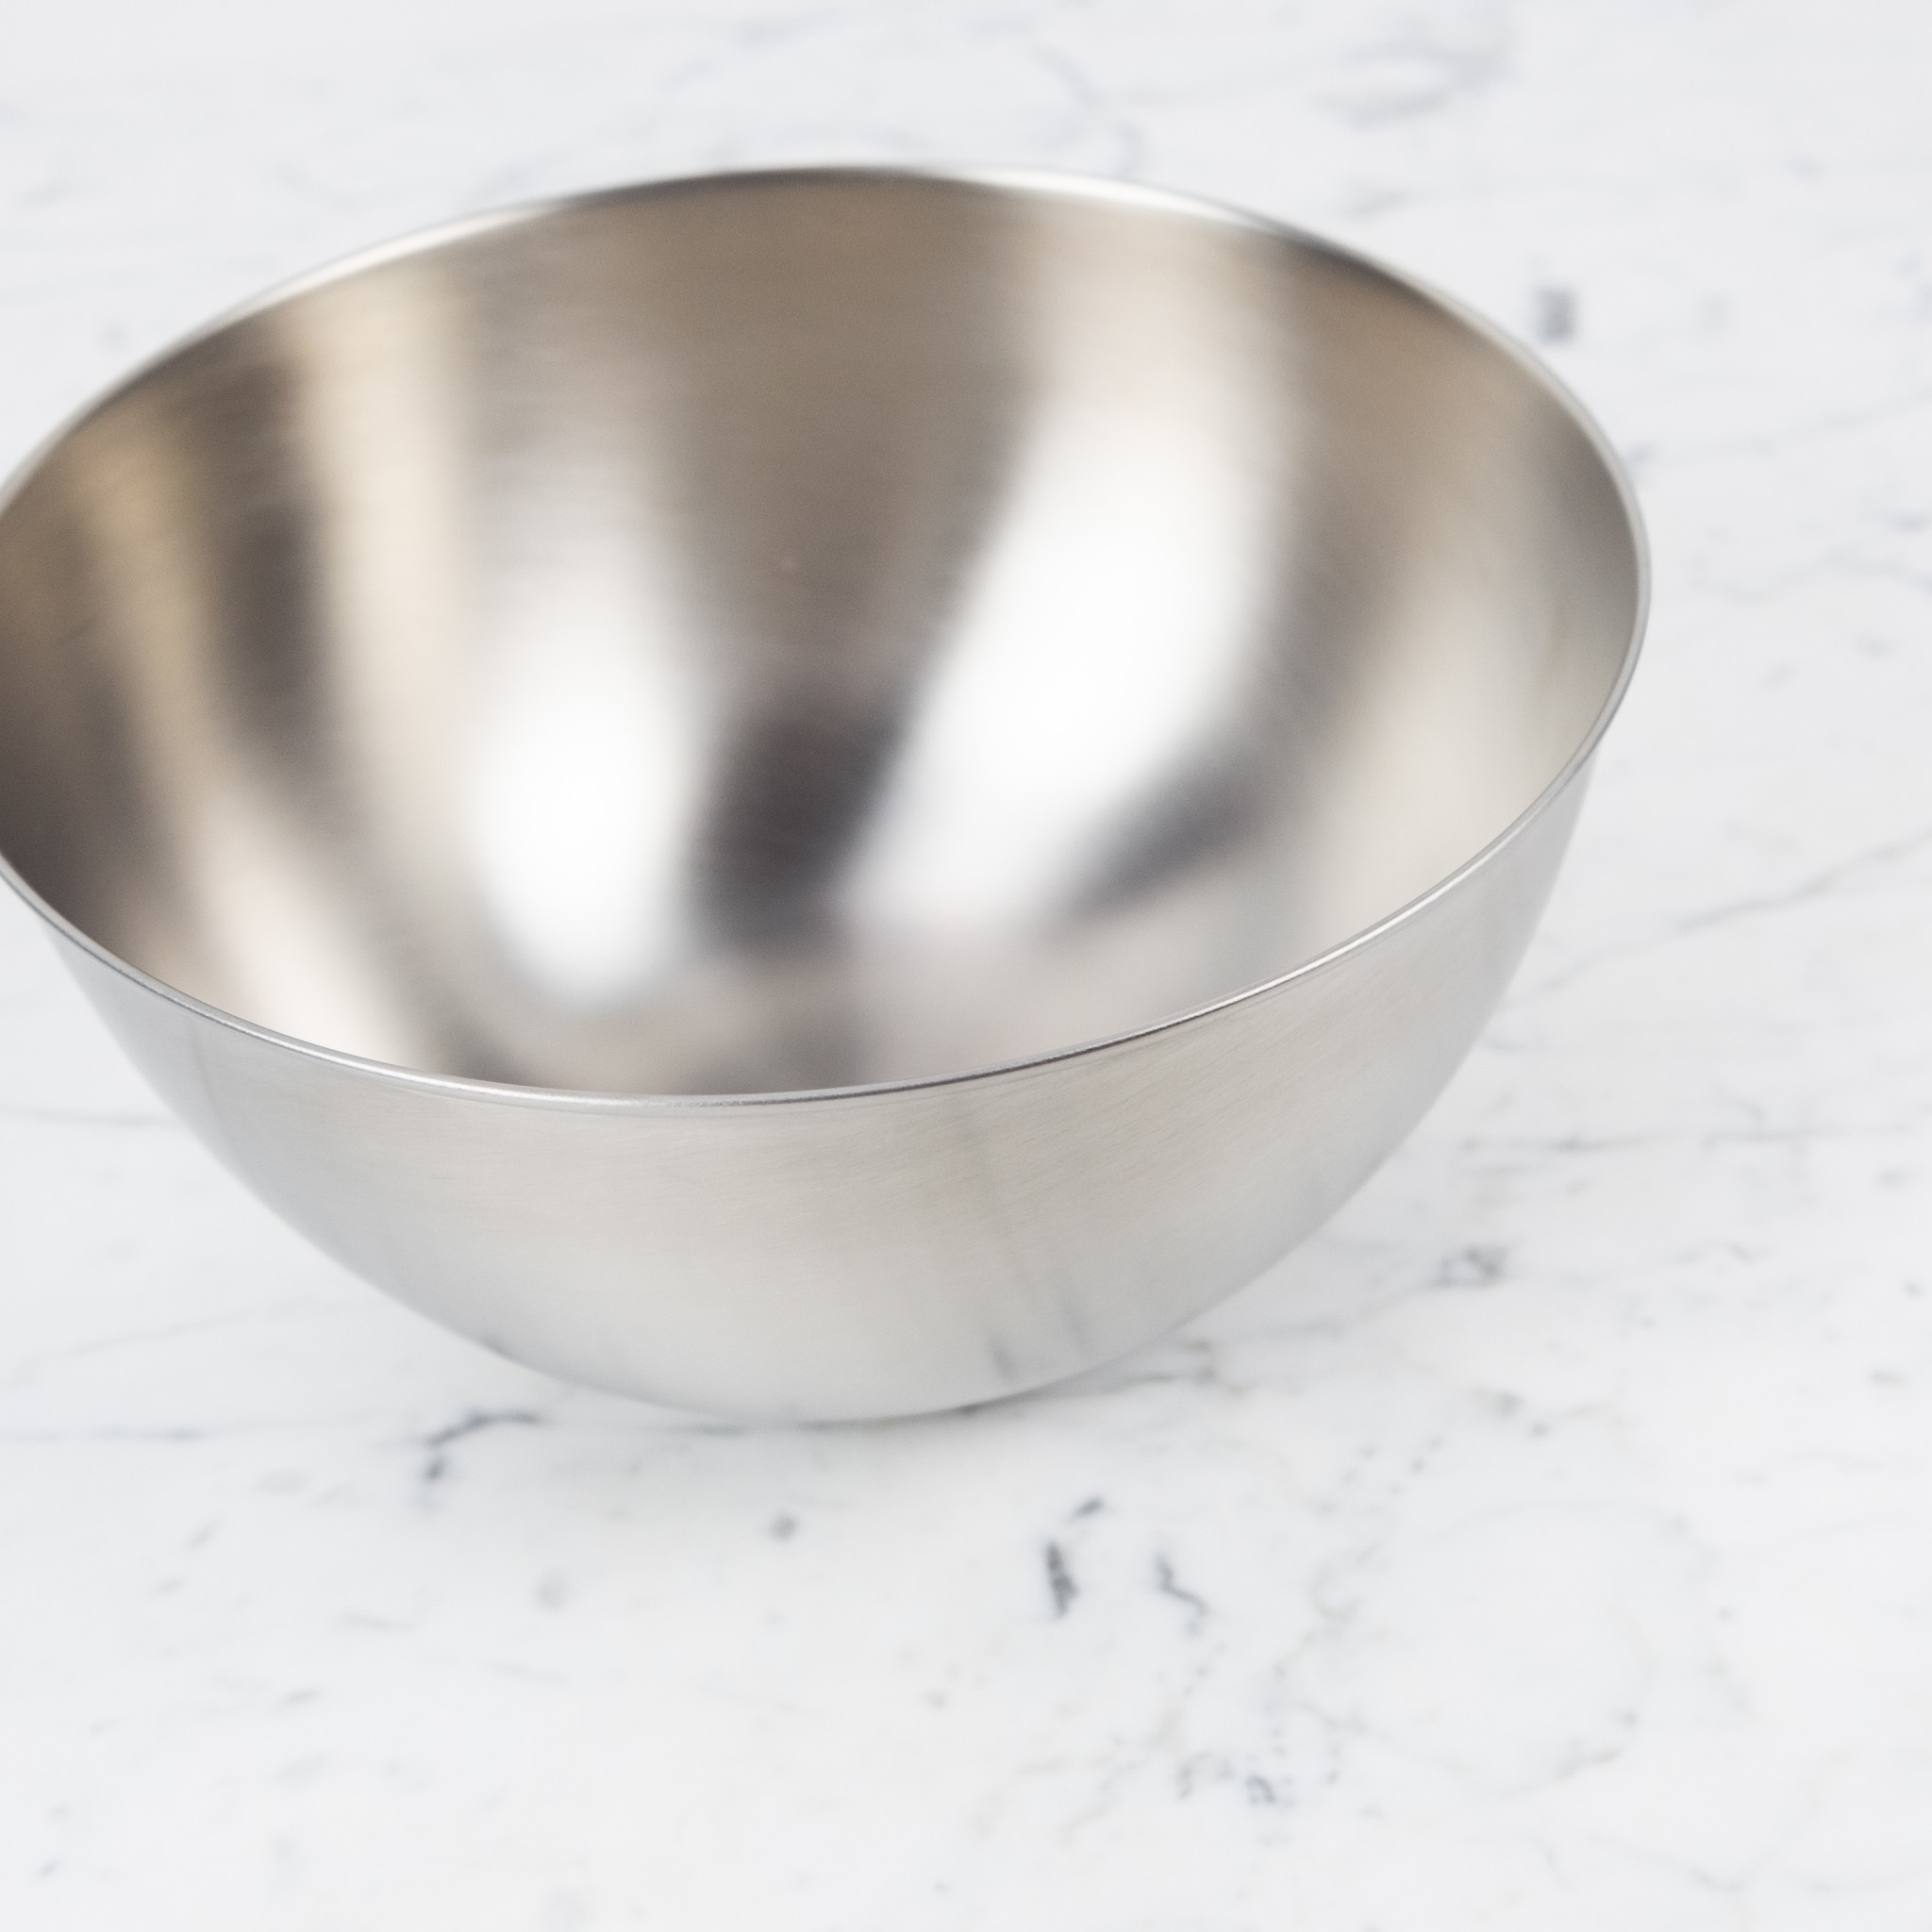 Japanese Stainless Steel Mixing Bowl - 9.25" D